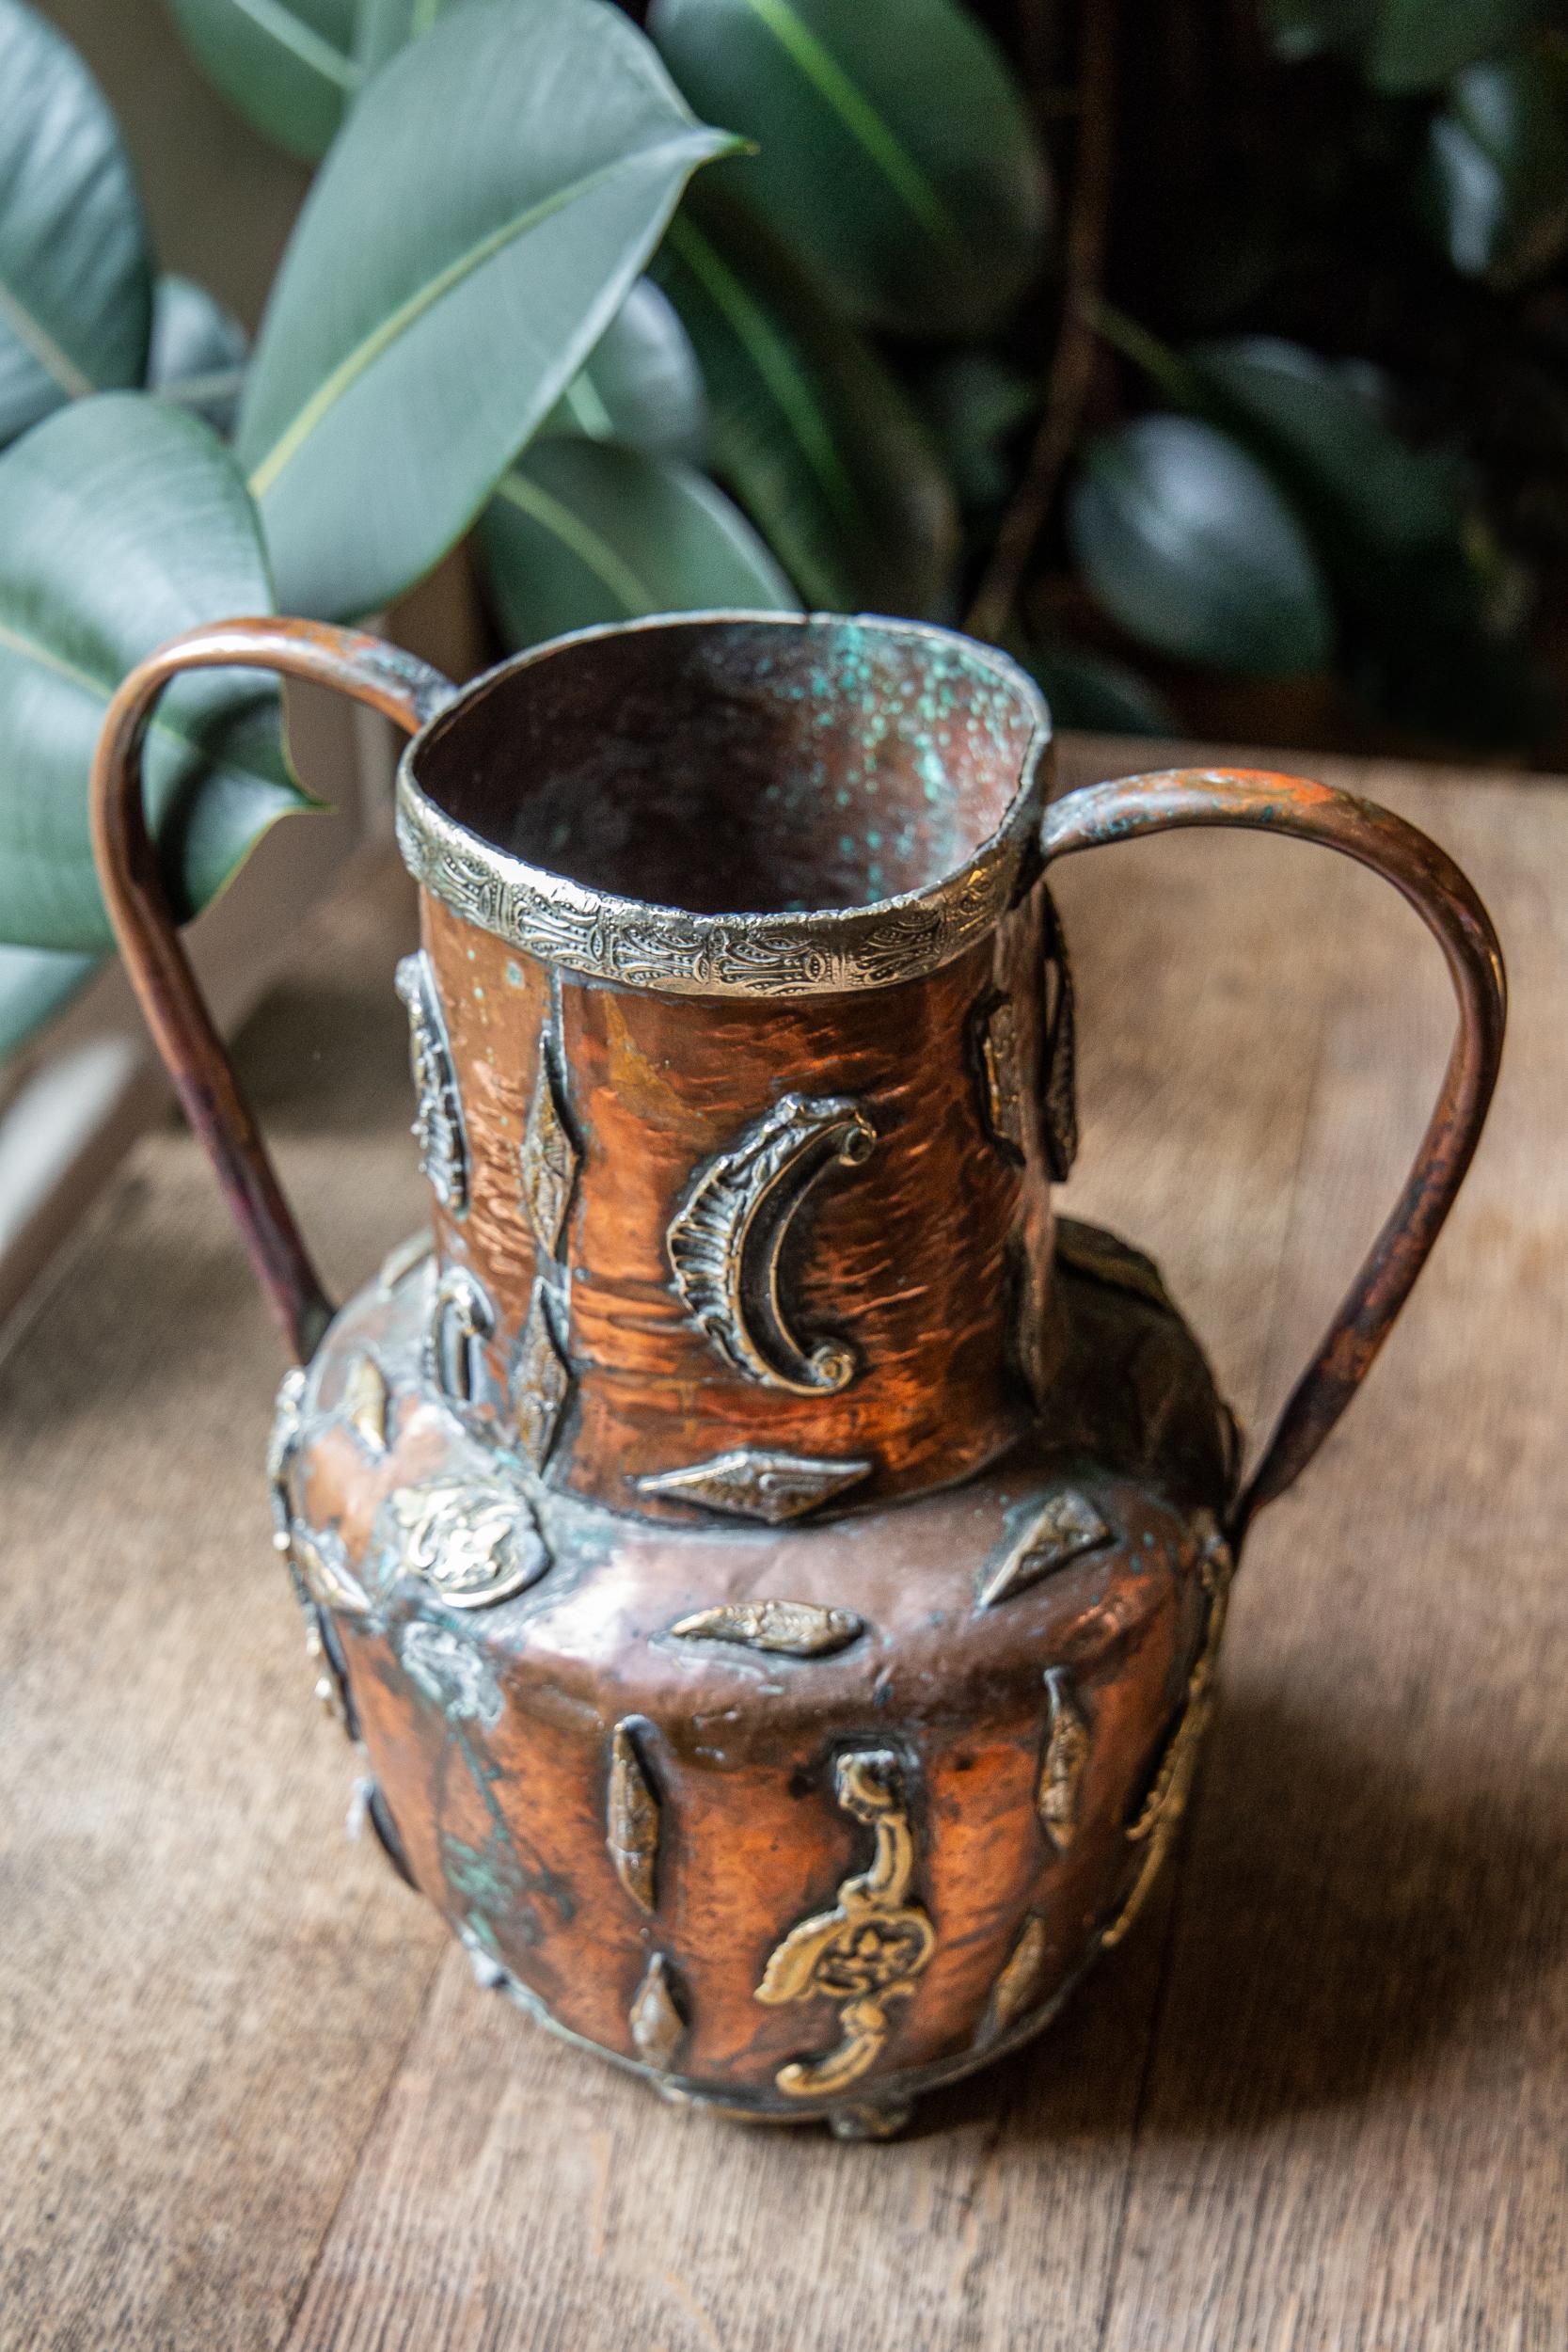 Distinctive beautiful form, artisan in feel - with brazened decorative symbols and ornamentation showing signs of aged verdigris. The brass overlaid lip with detailed pattern. 

 